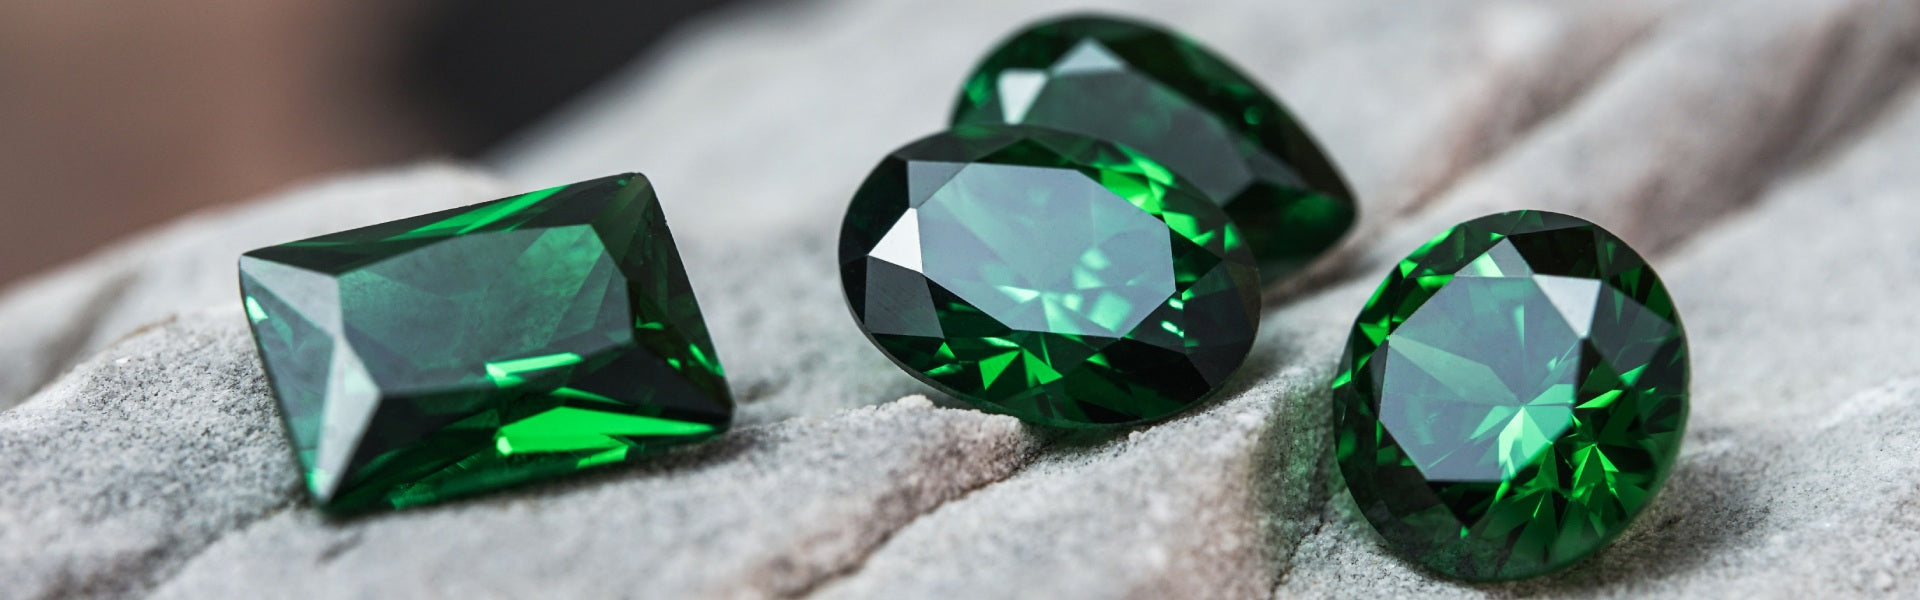 Sell Emerald Stones for Top Dollar - Fort Lauderdale, FL